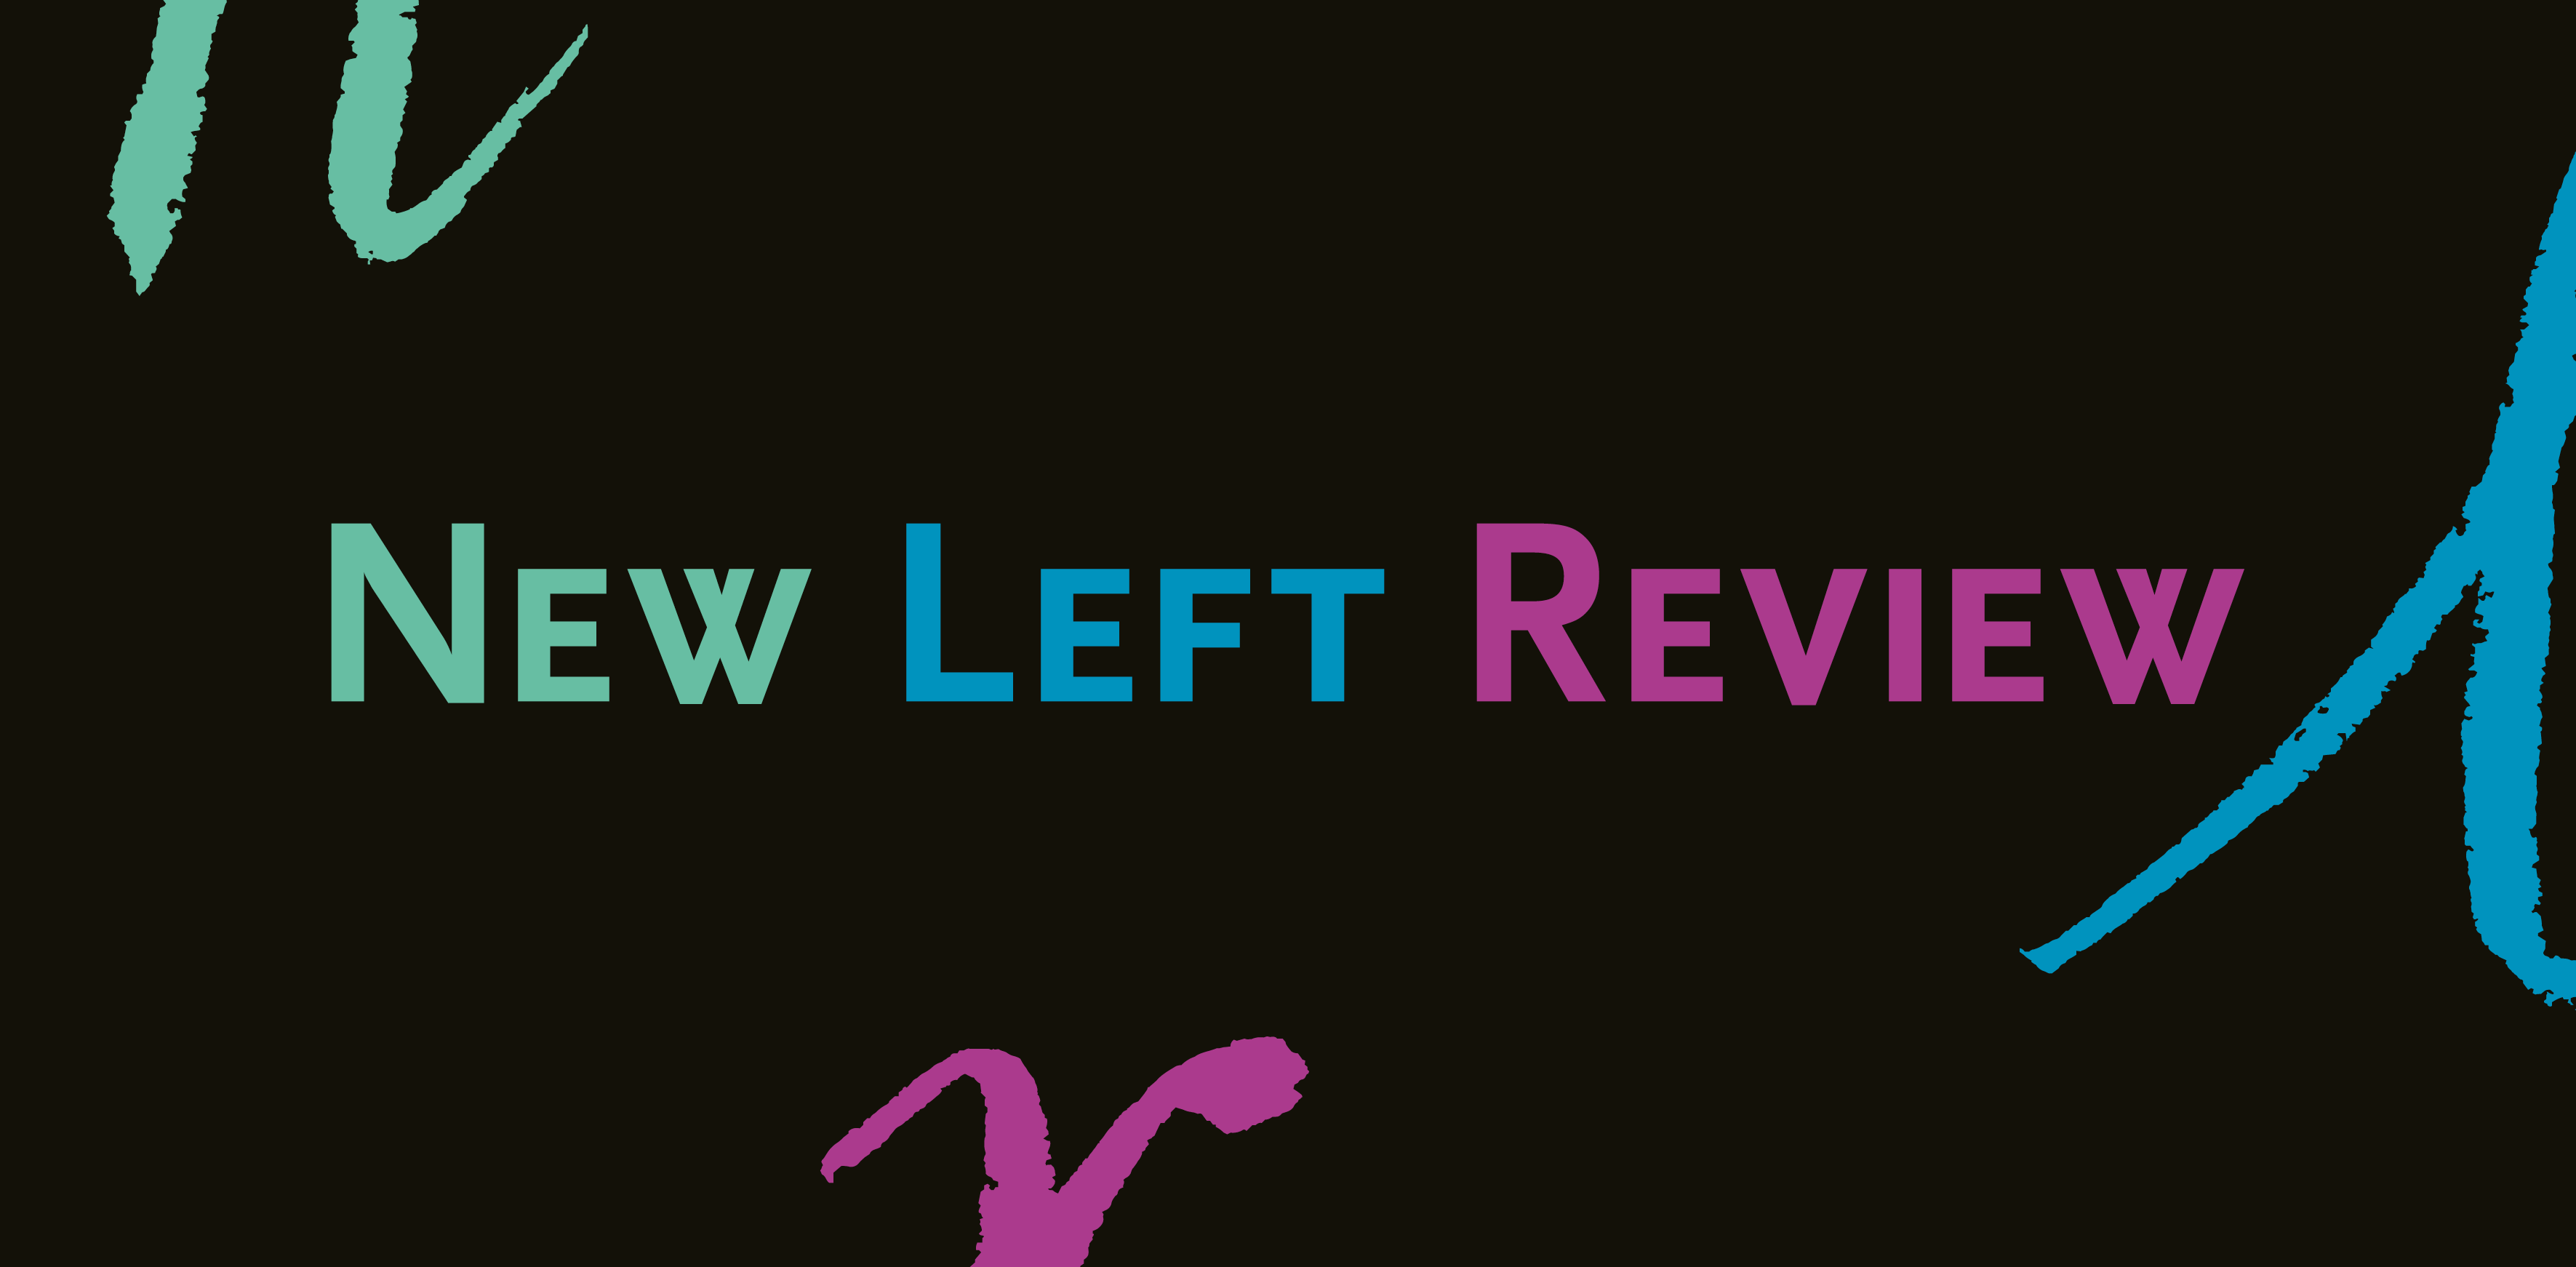 newleftreview.org